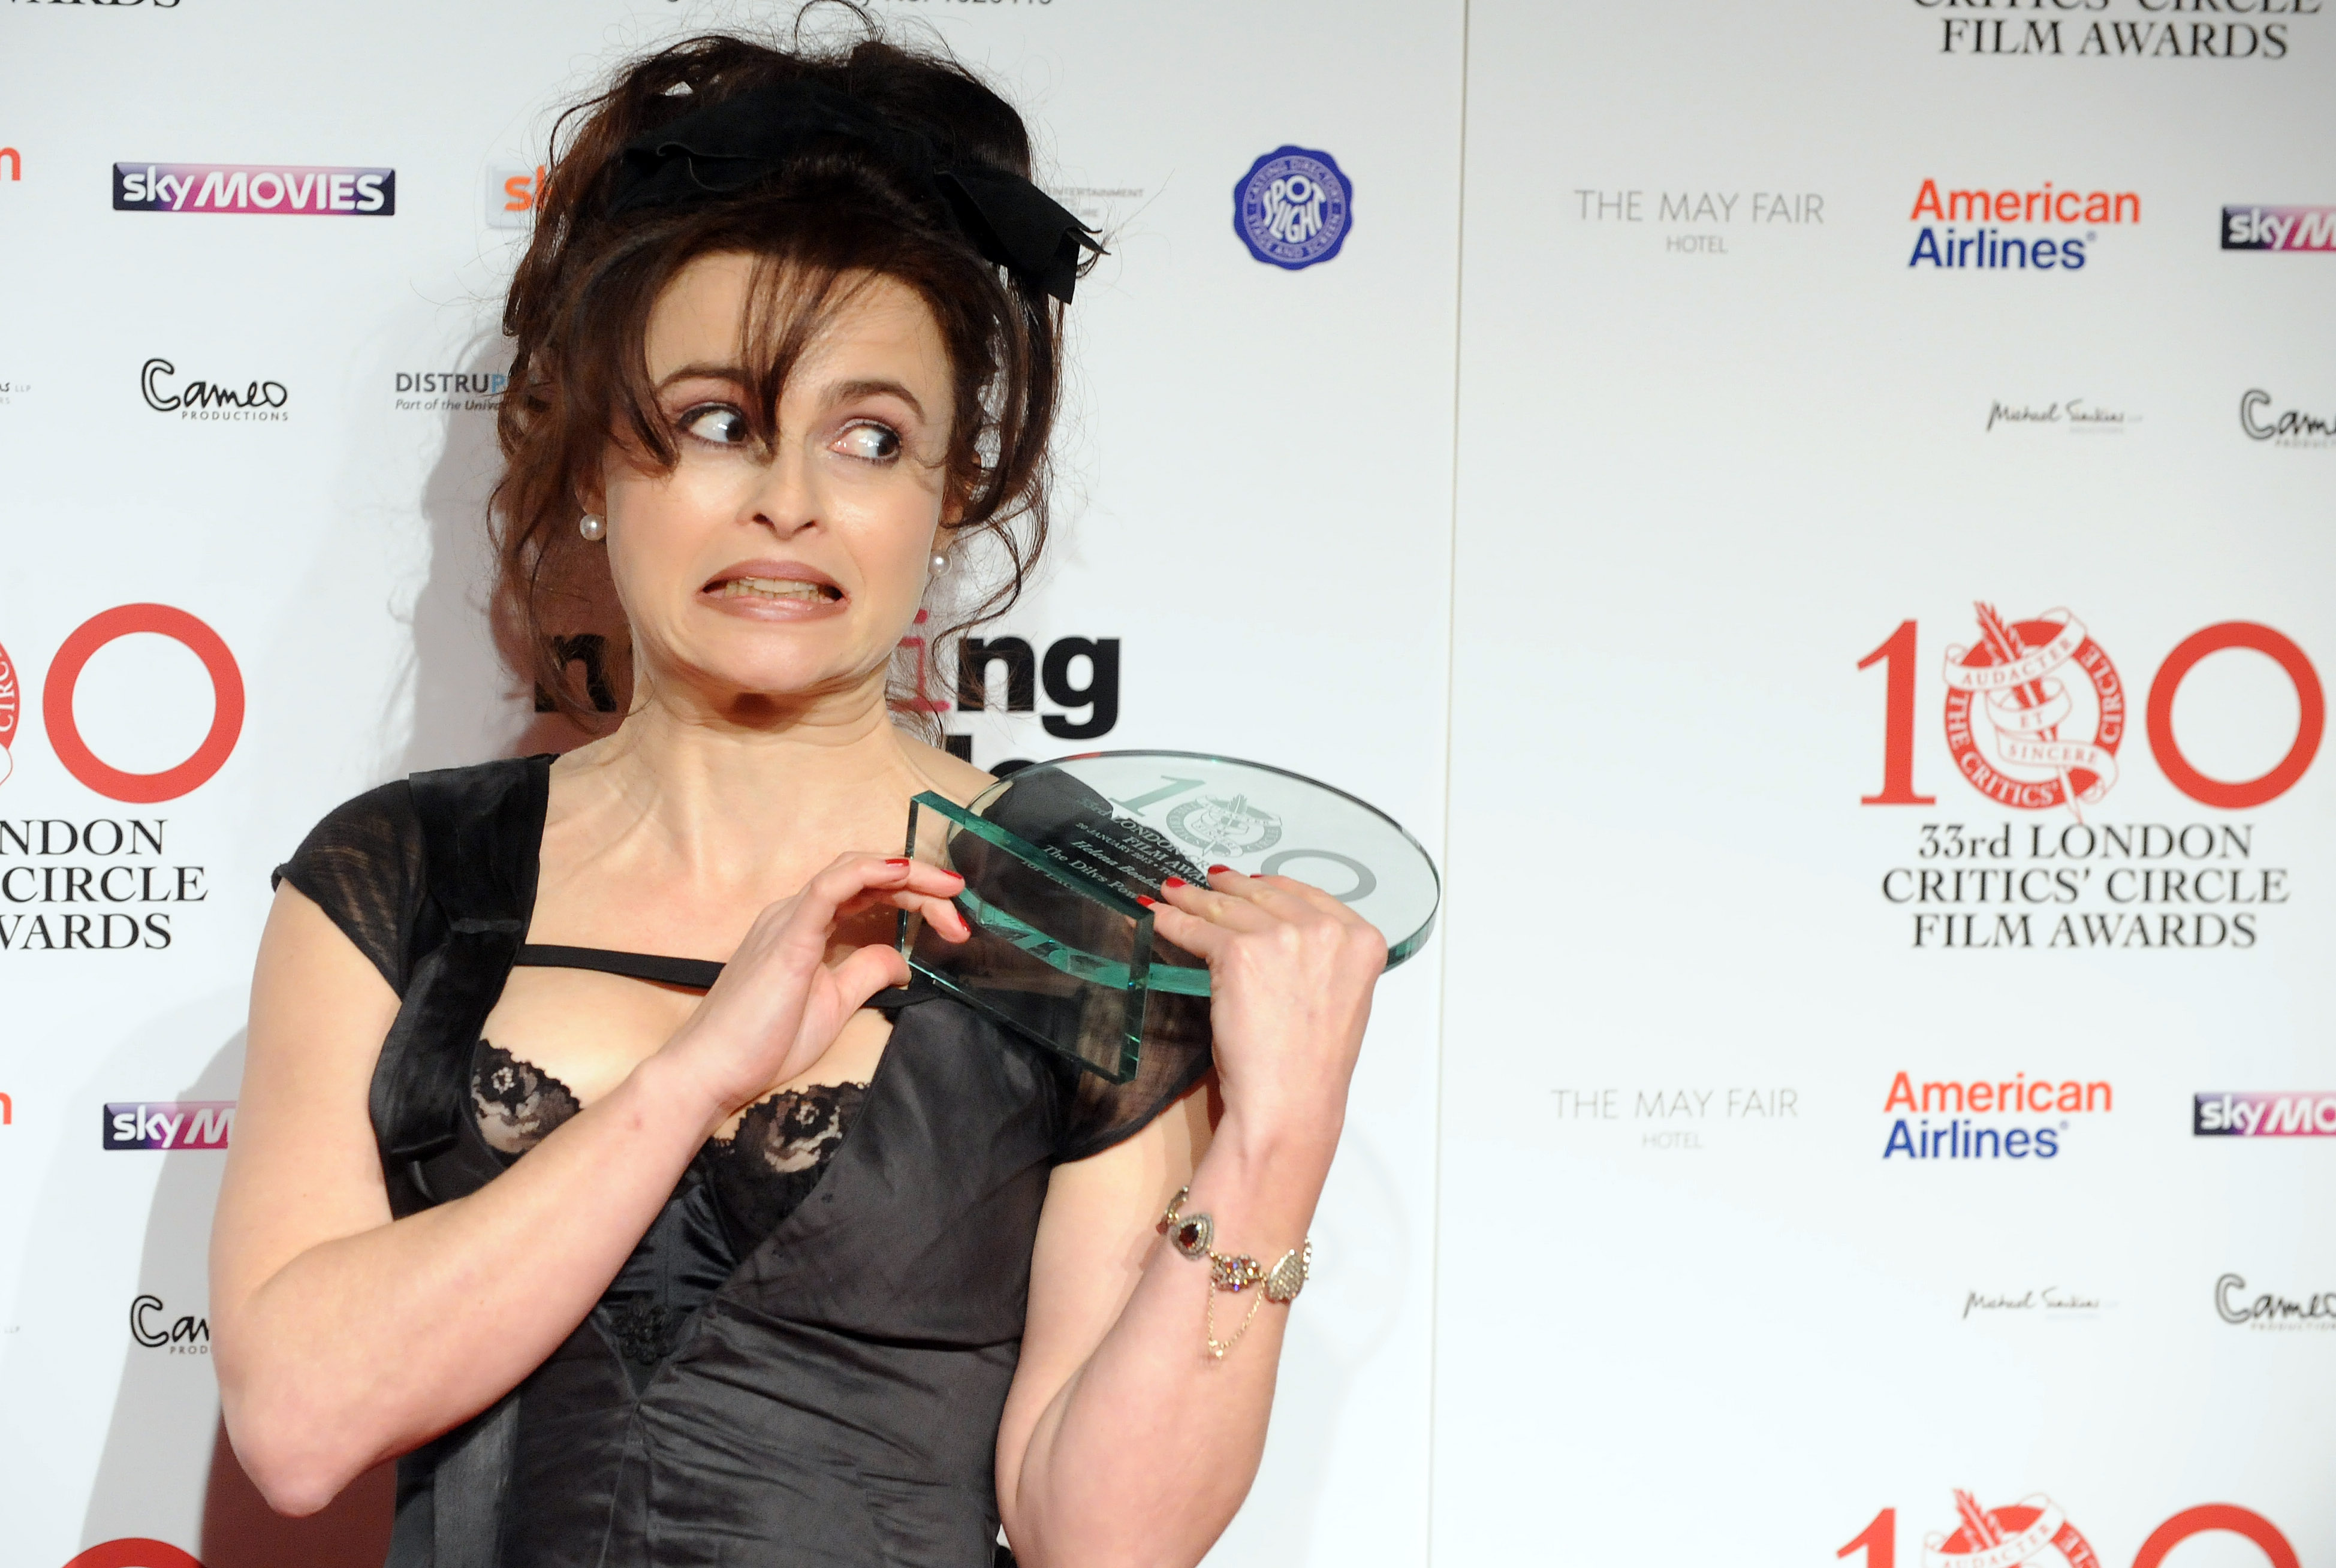 LONDON, UNITED KINGDOM - JANUARY 20: Helena Bonham Carter poses in the press room at the London Critics' Circle Film Awards at The Mayfair Hotel on January 20, 2013 in London, England. (Photo by Stuart Wilson/Getty Images)